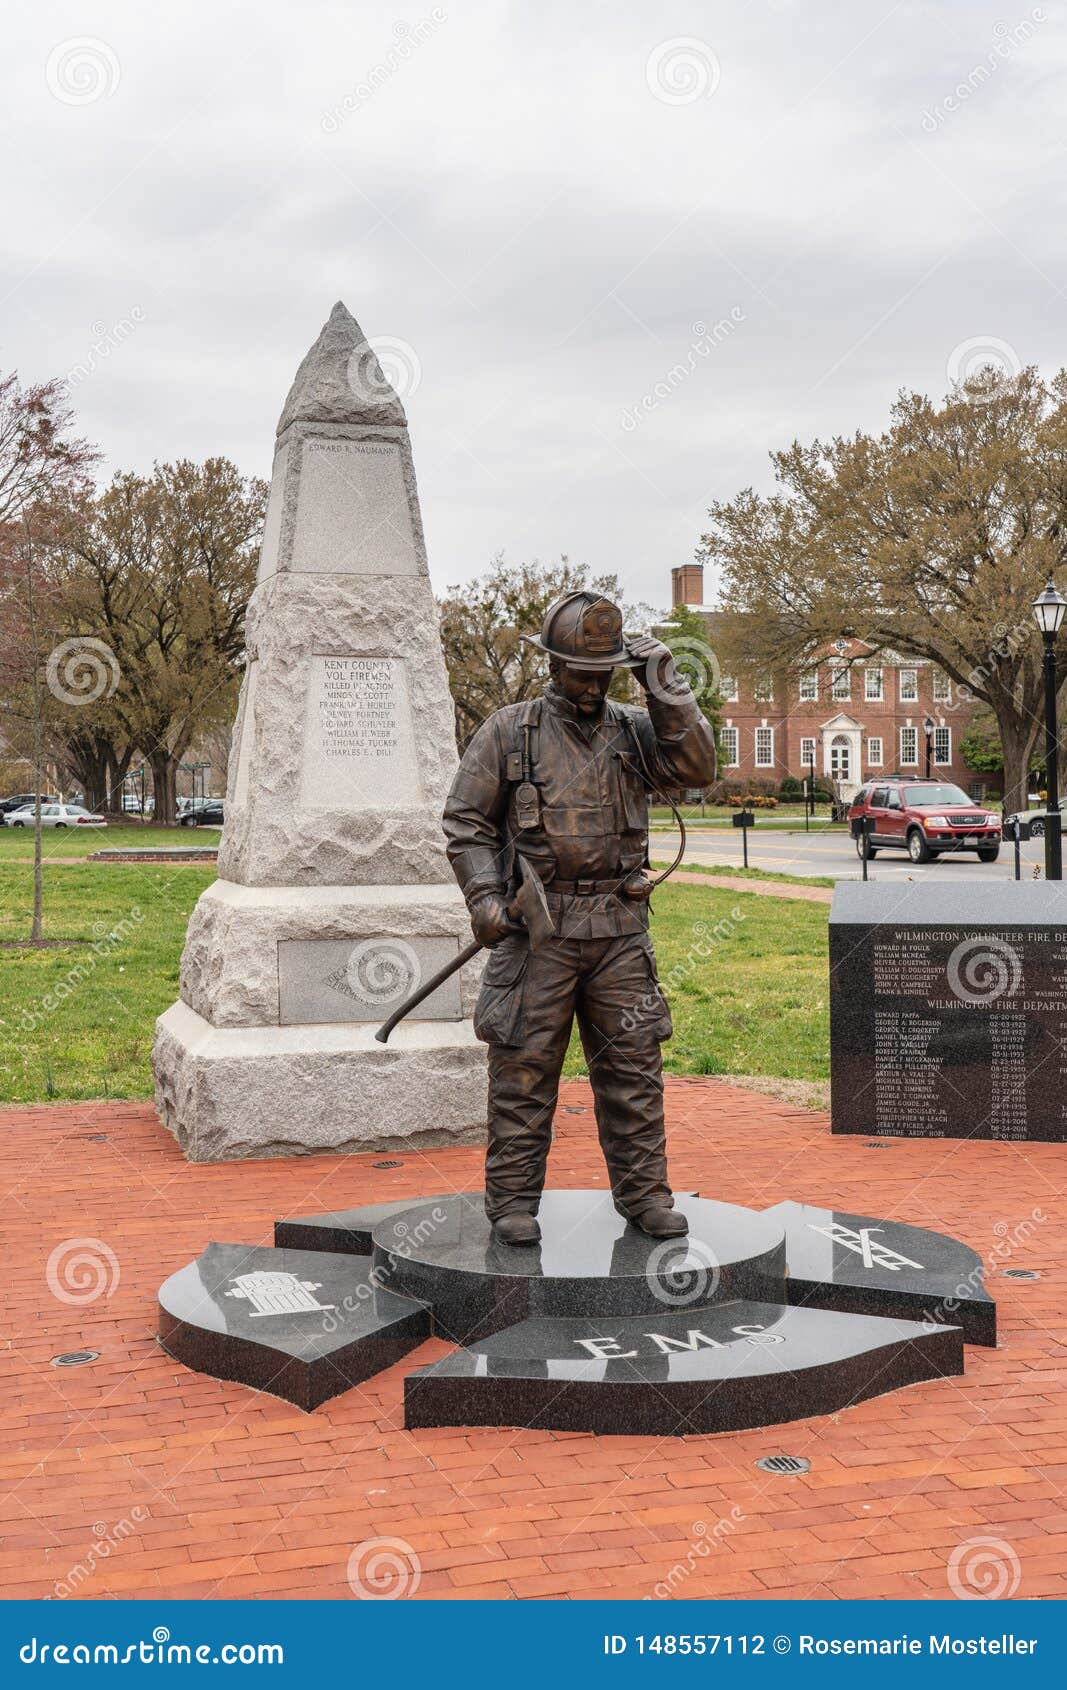 The Firefighters Memorial Includes a Bronze Figure of a Fireman